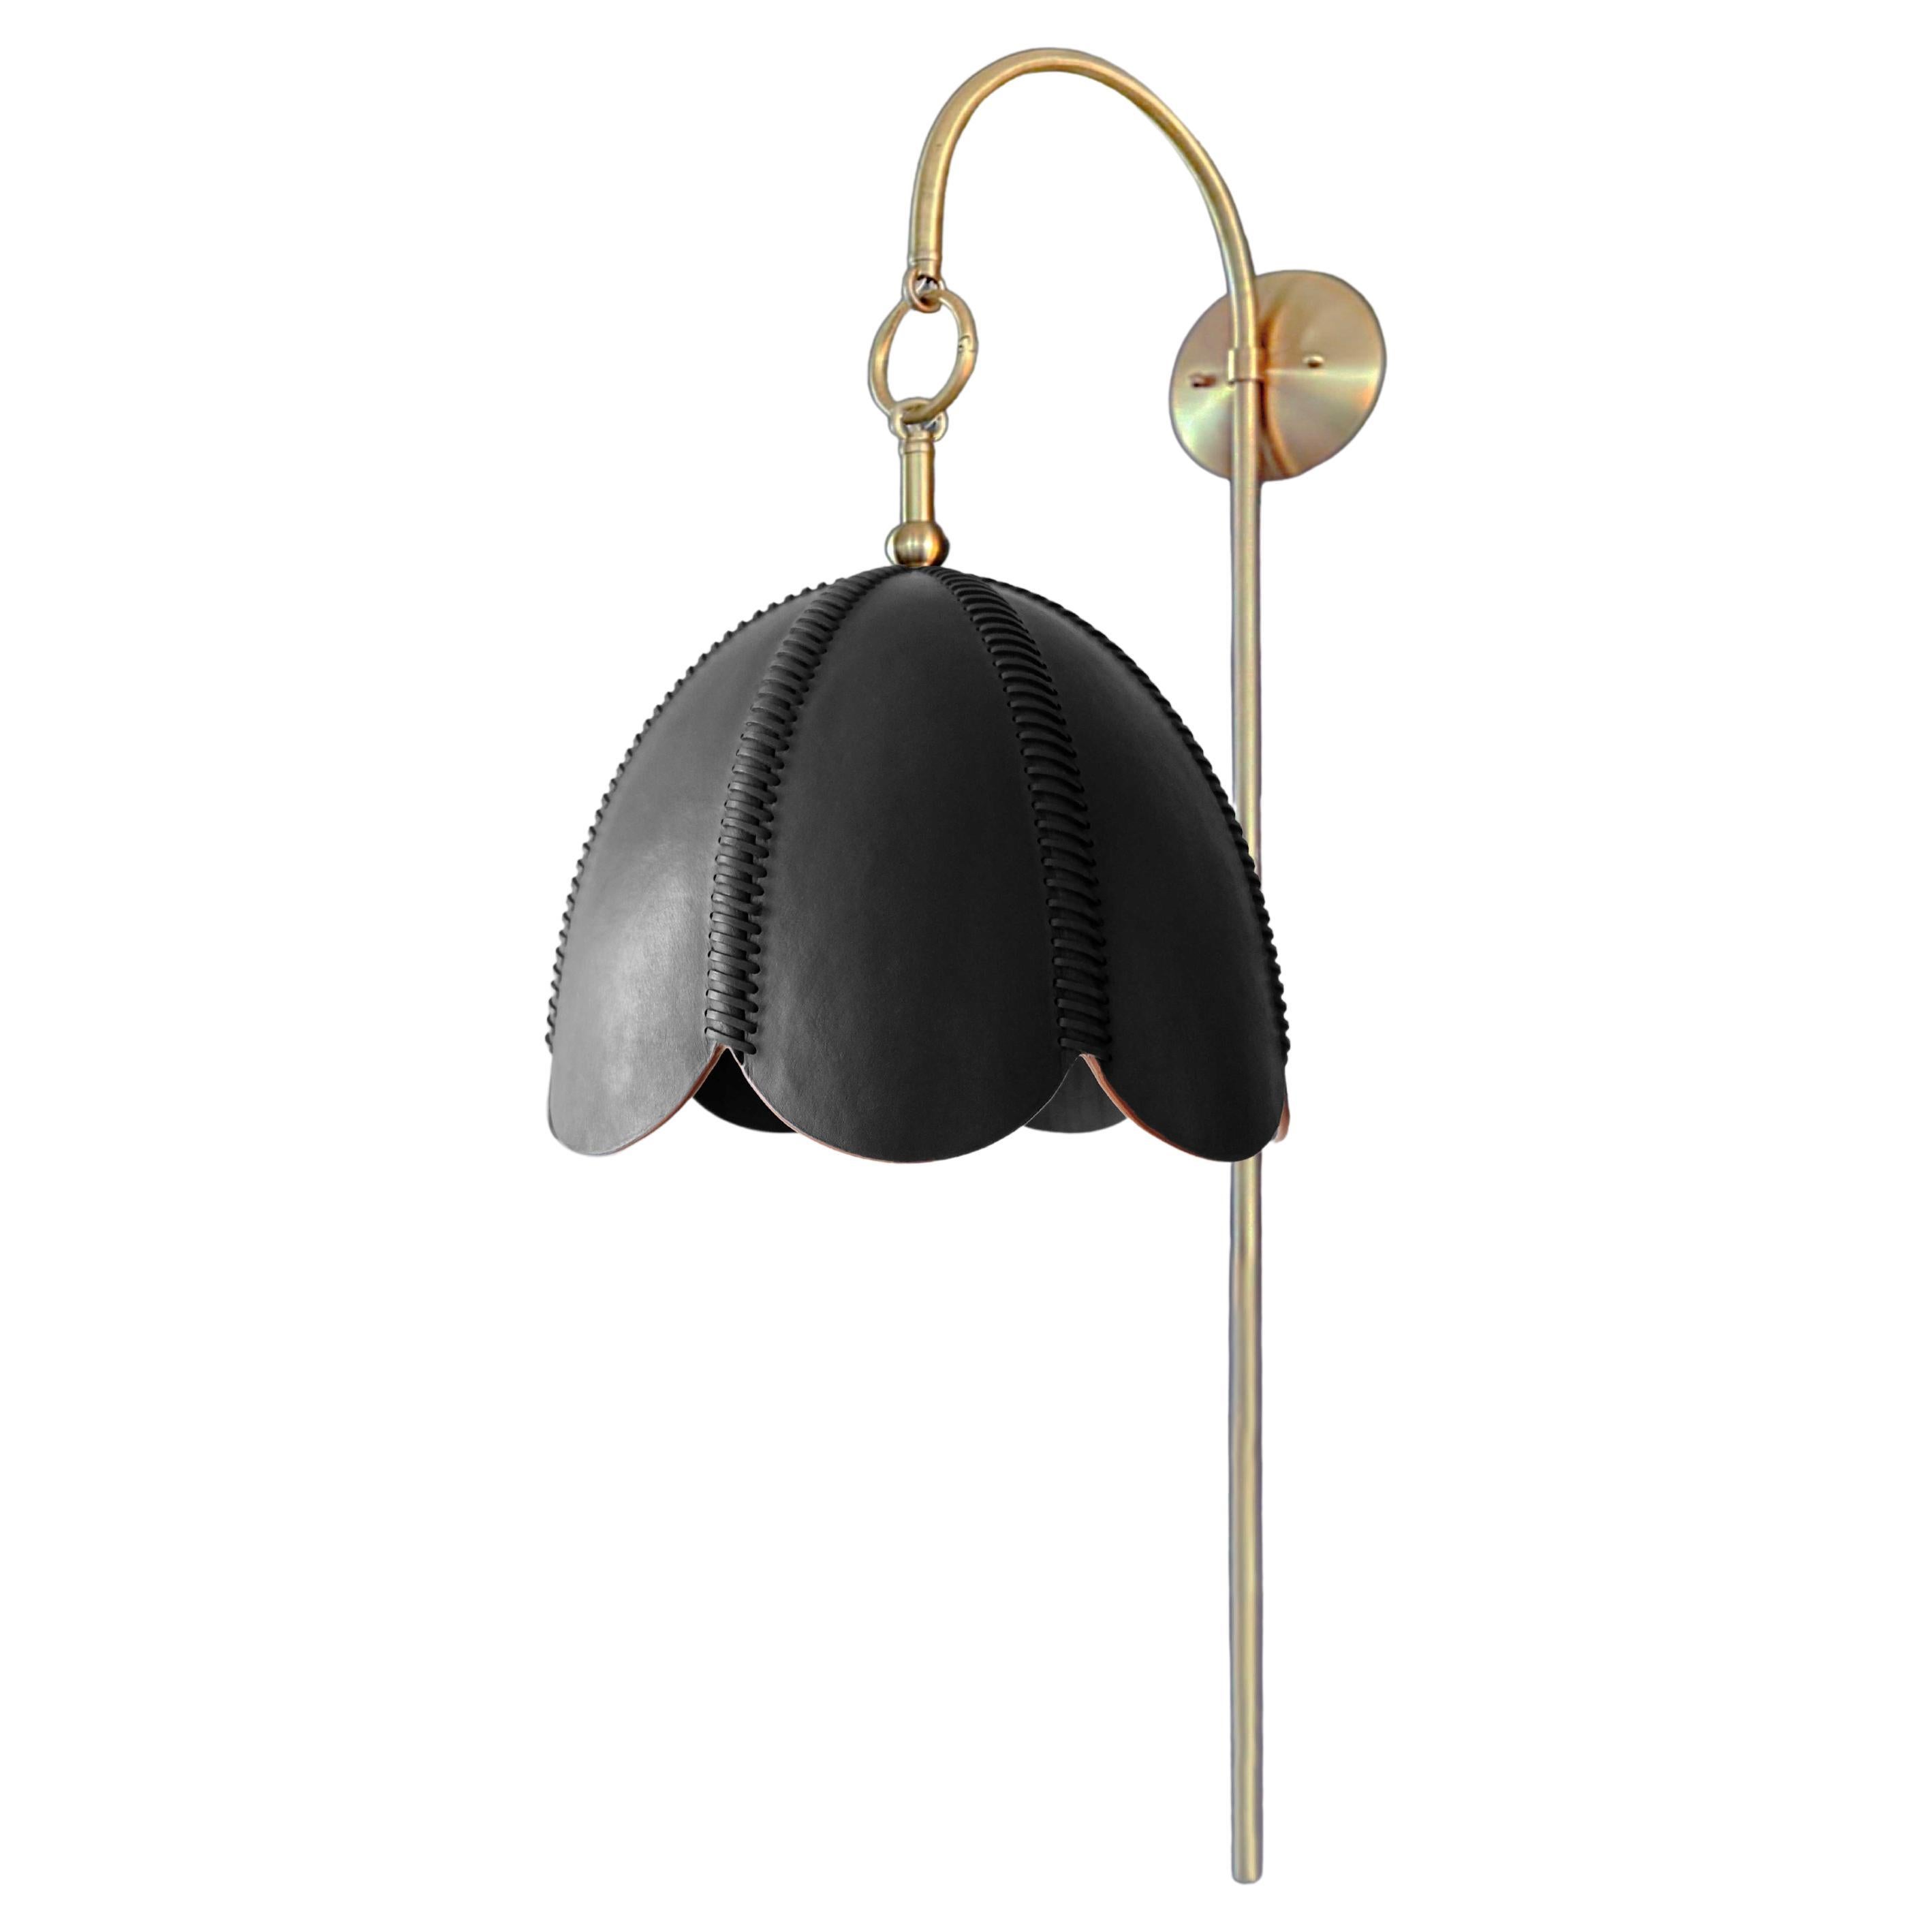 Leather Arched Sconce, Black, Small, Doma, Saddle Lamp Collection For Sale